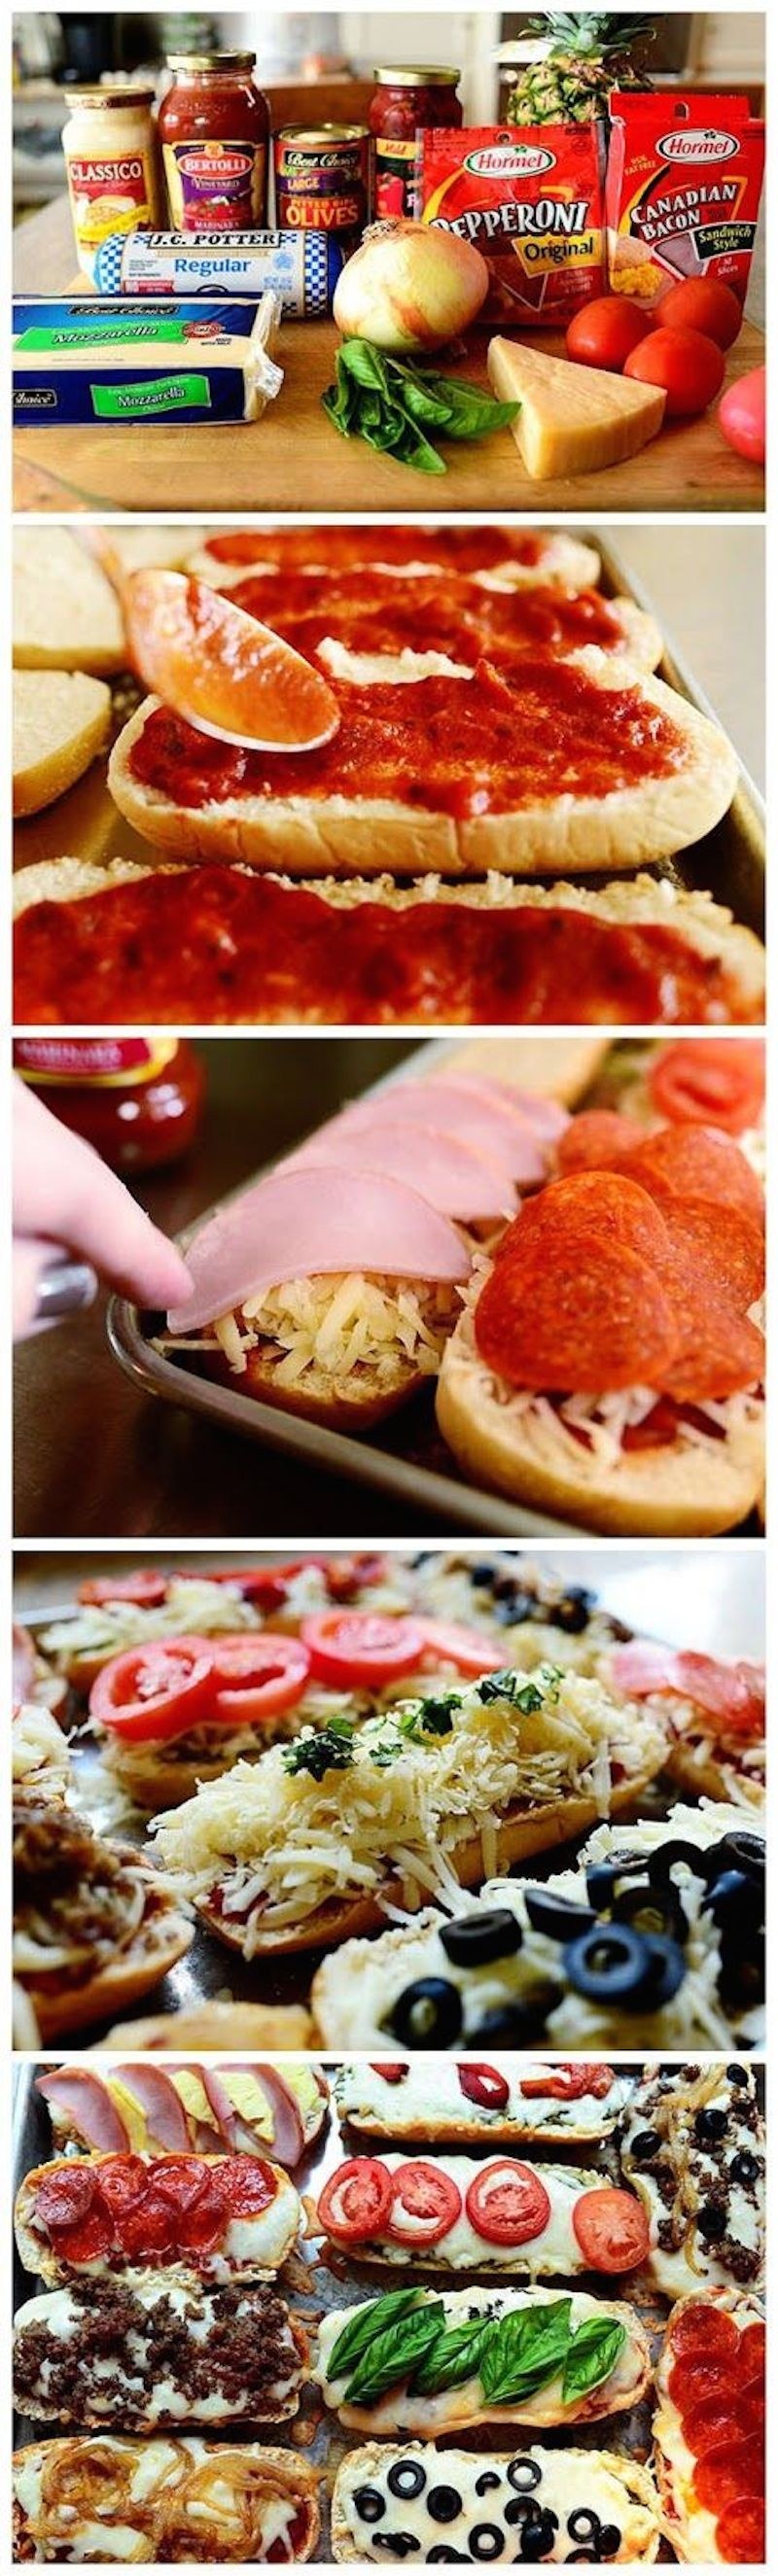 Easiest French bread Pizzas